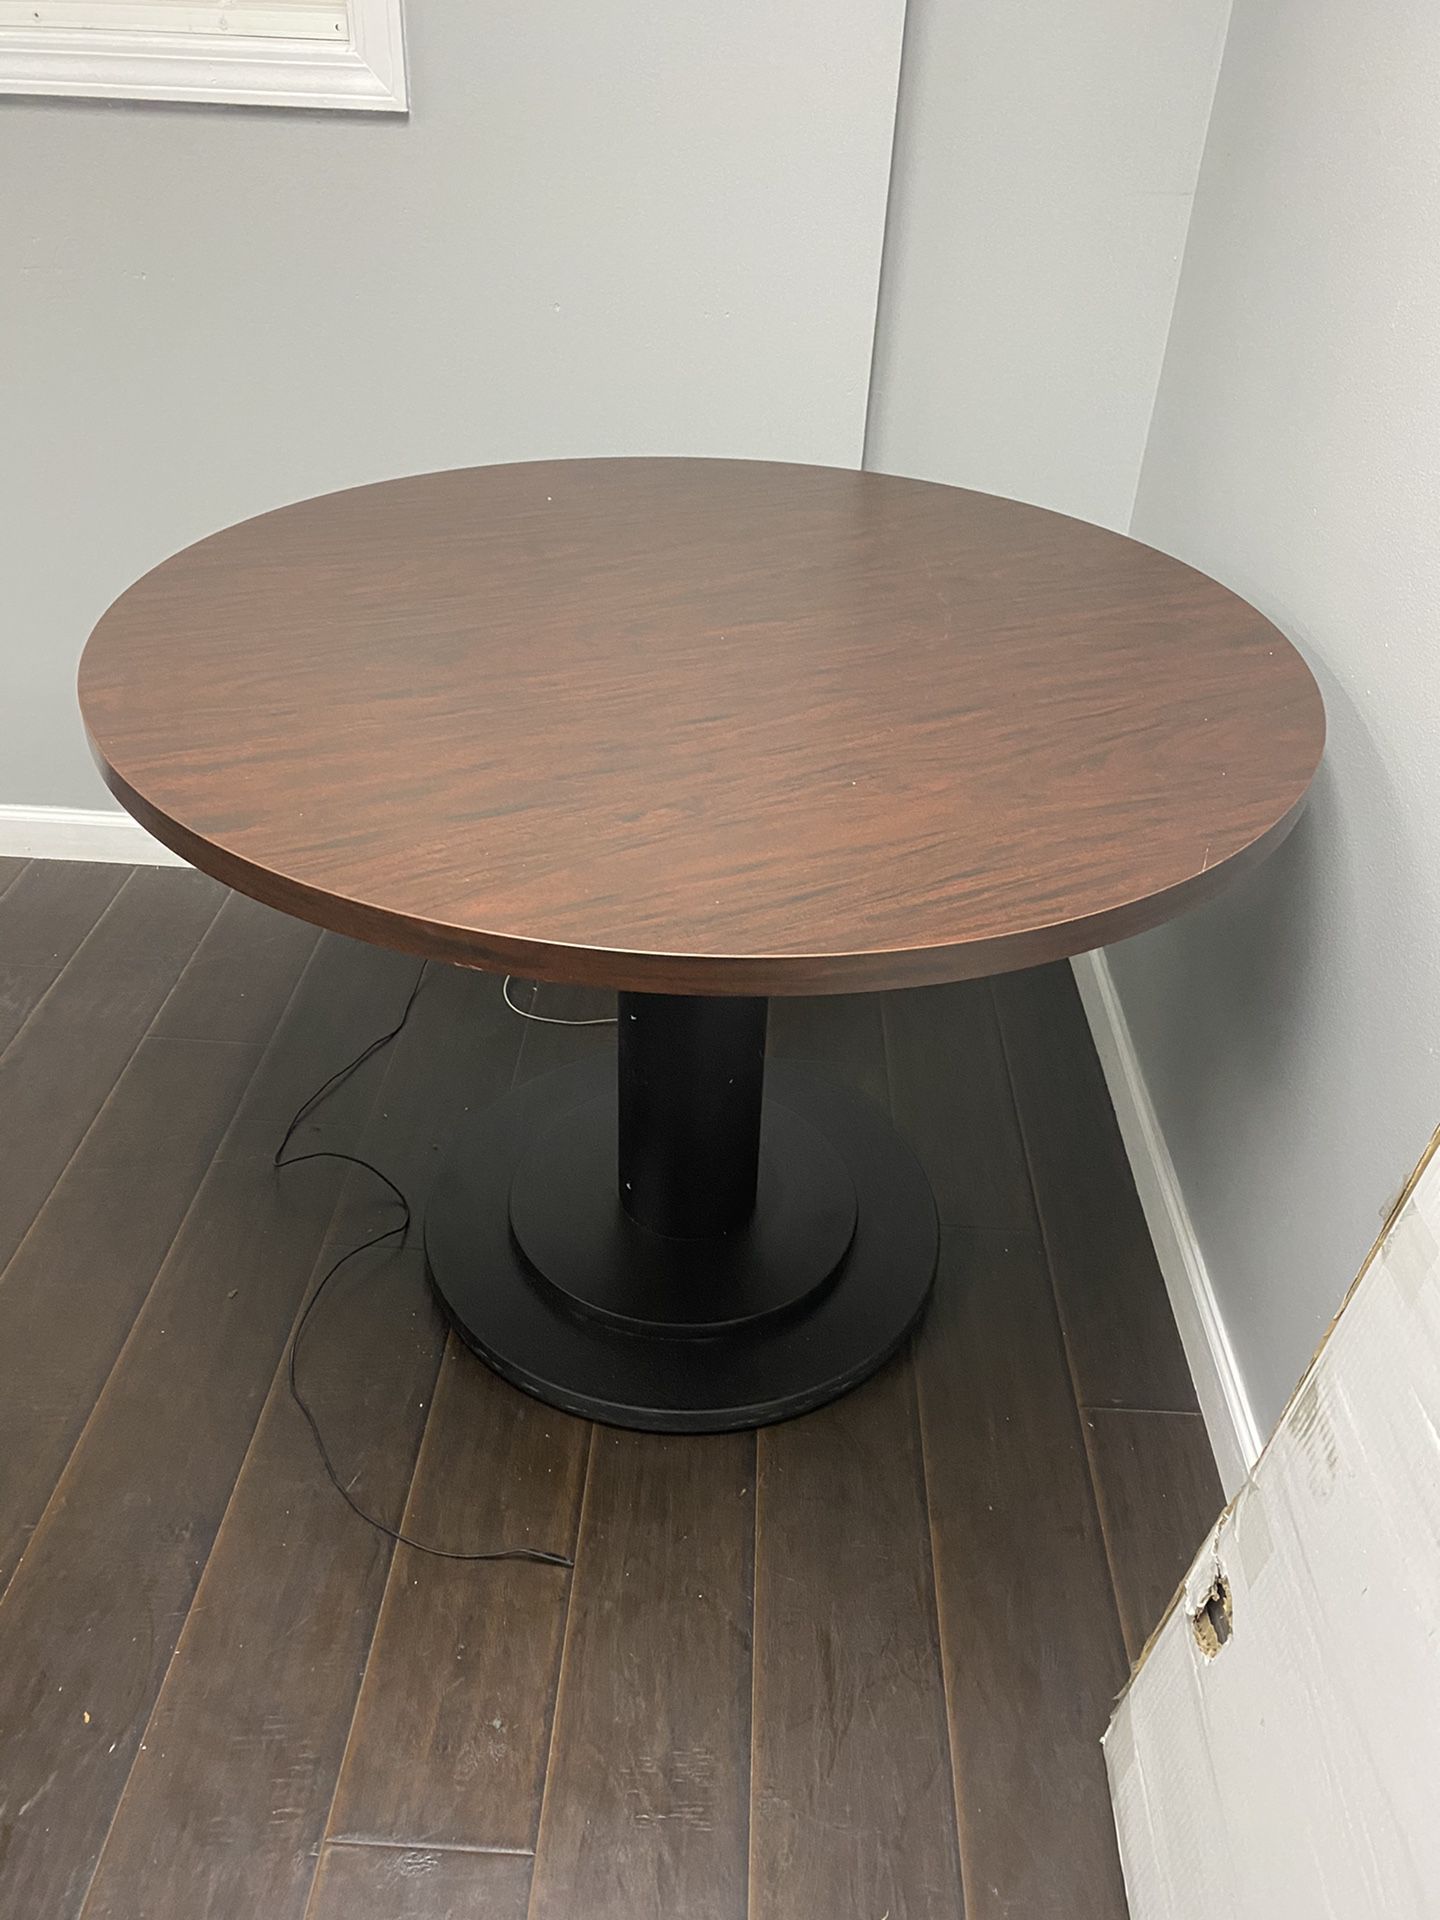 Office Table